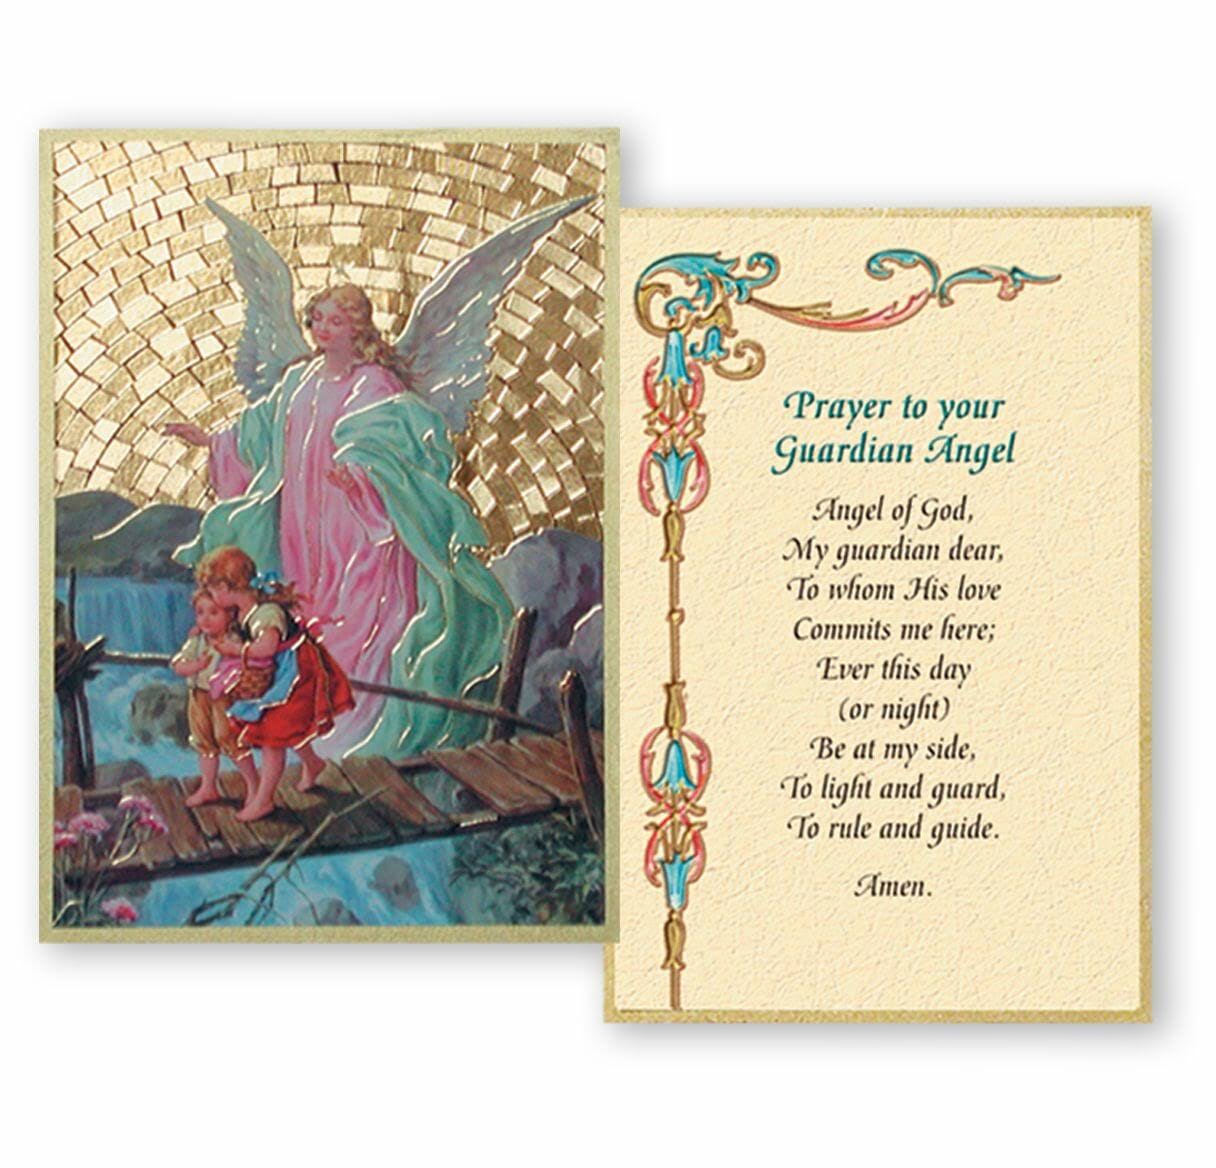 Guardian Angel Traditional Mosaic Wall Plaque - 4" x 6"